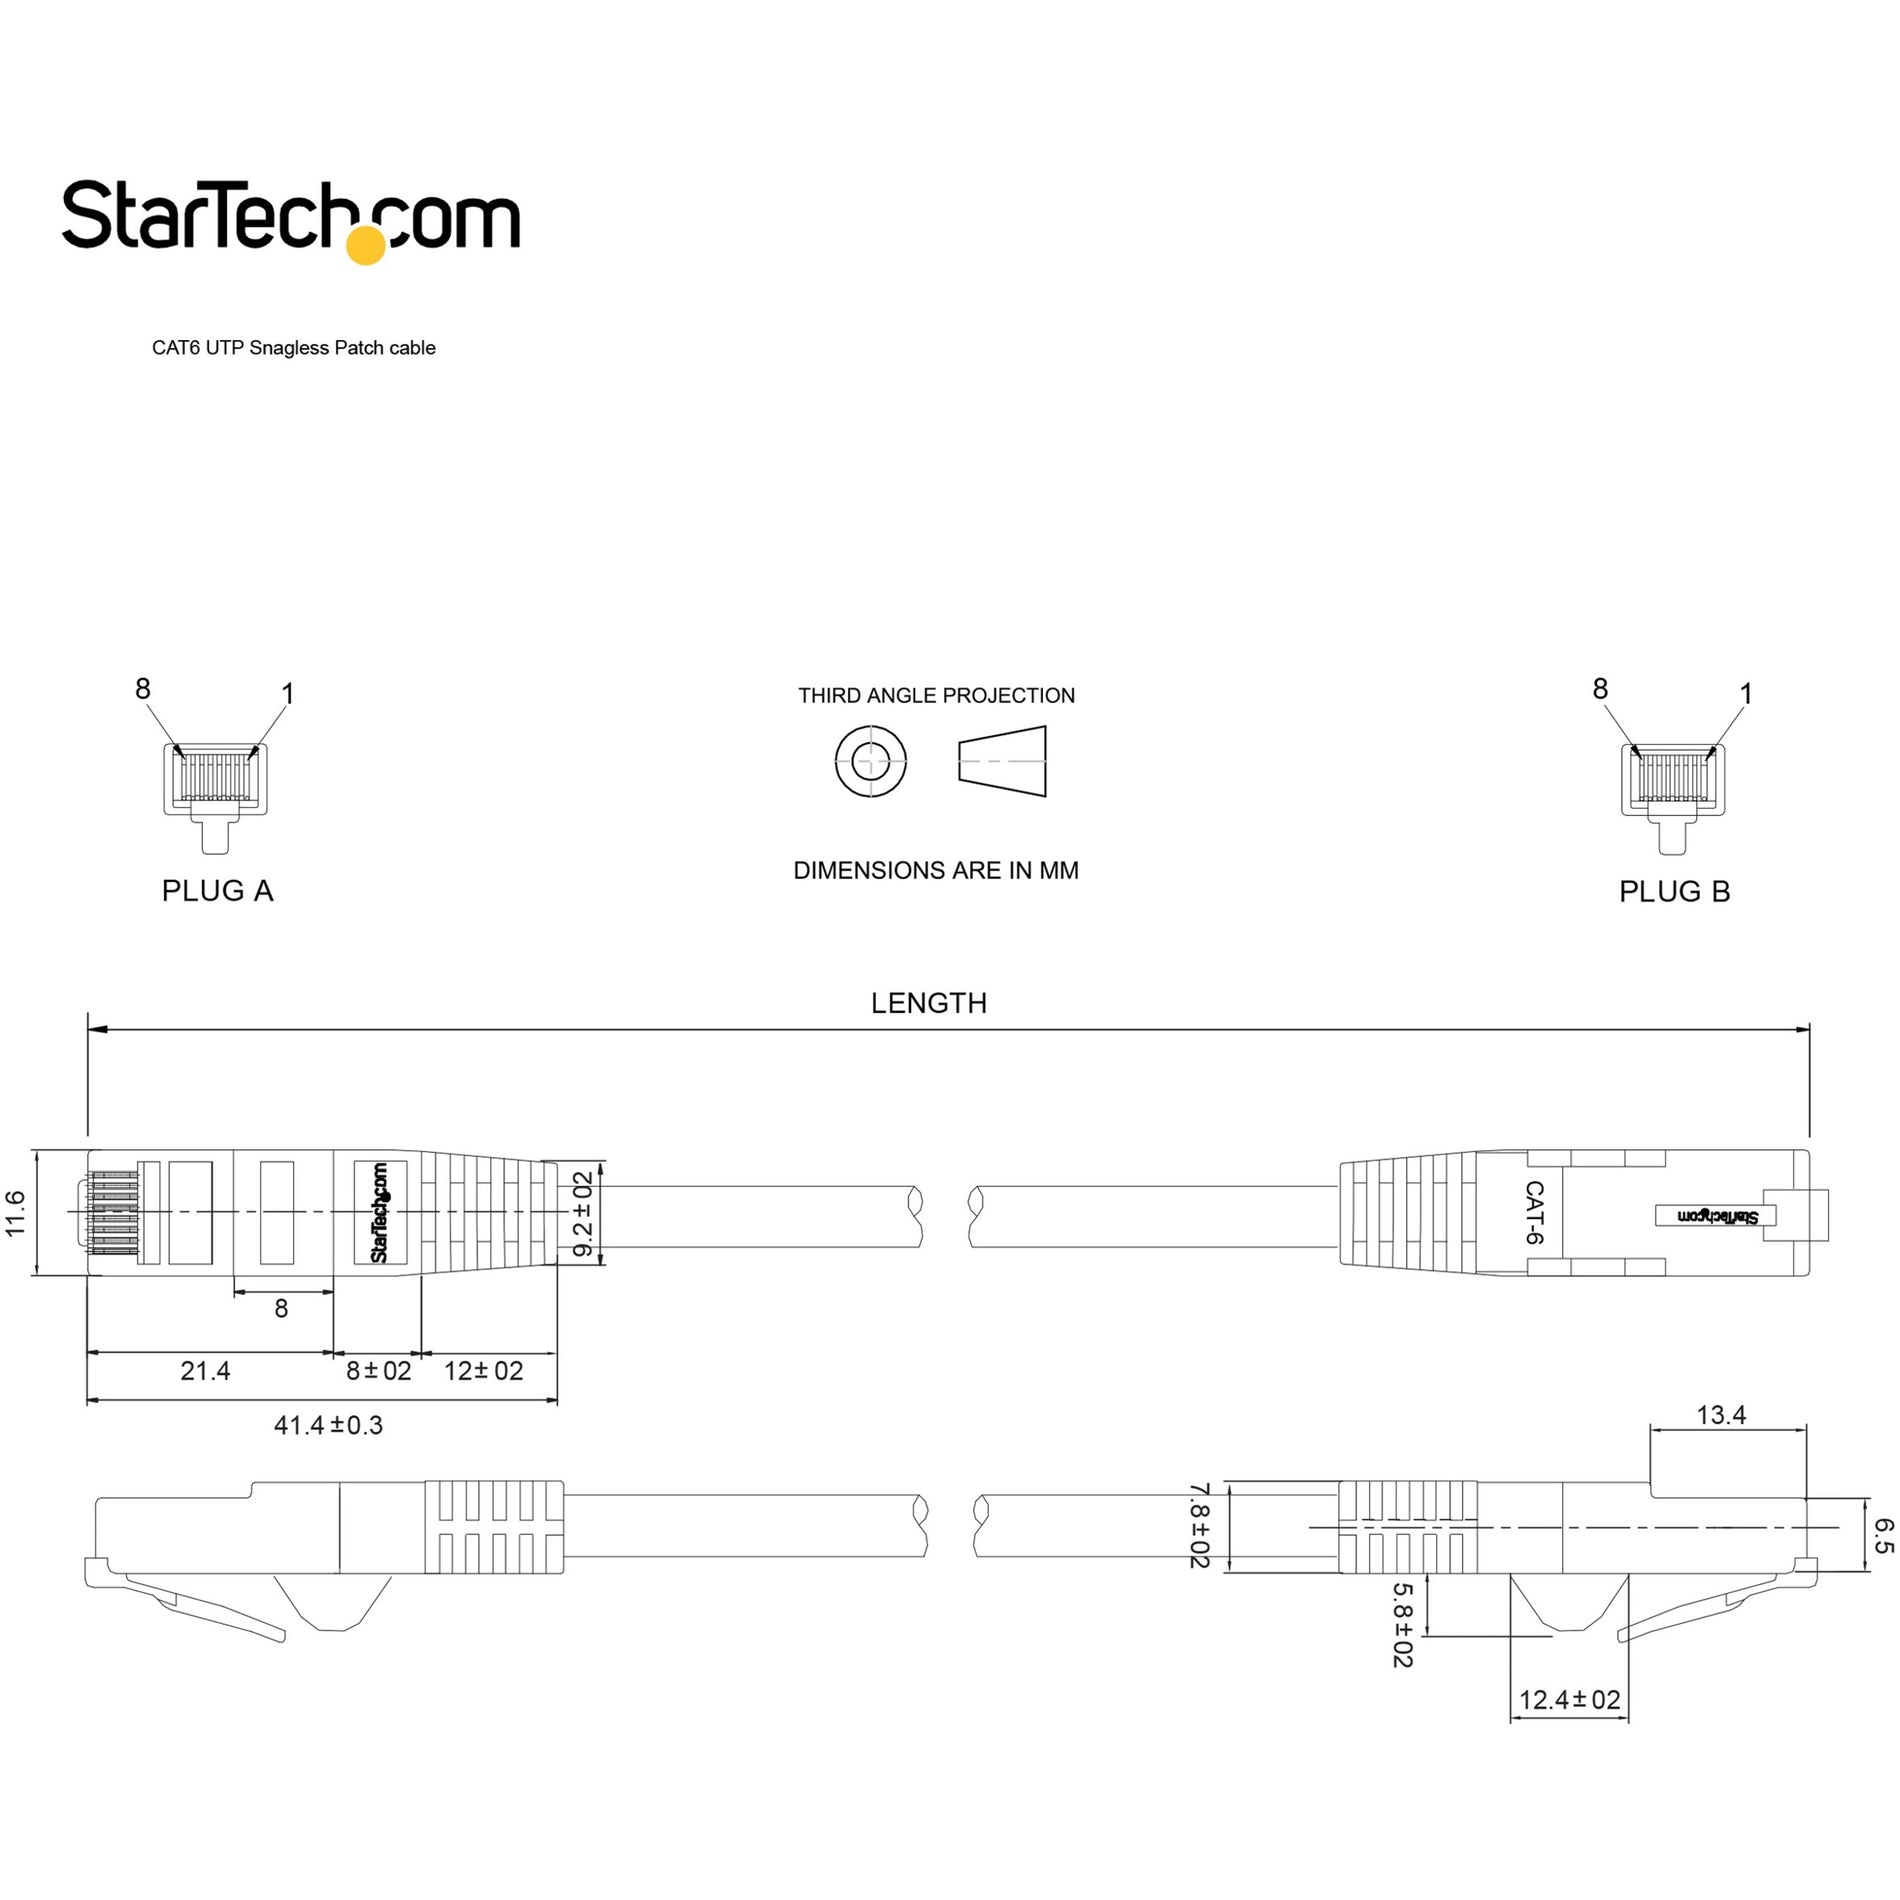 StarTech.com N6PATCH100BK 100 ft Black Snagless Cat6 UTP Patch Cable PoE 10 Gbit/s Data Transfer Rate